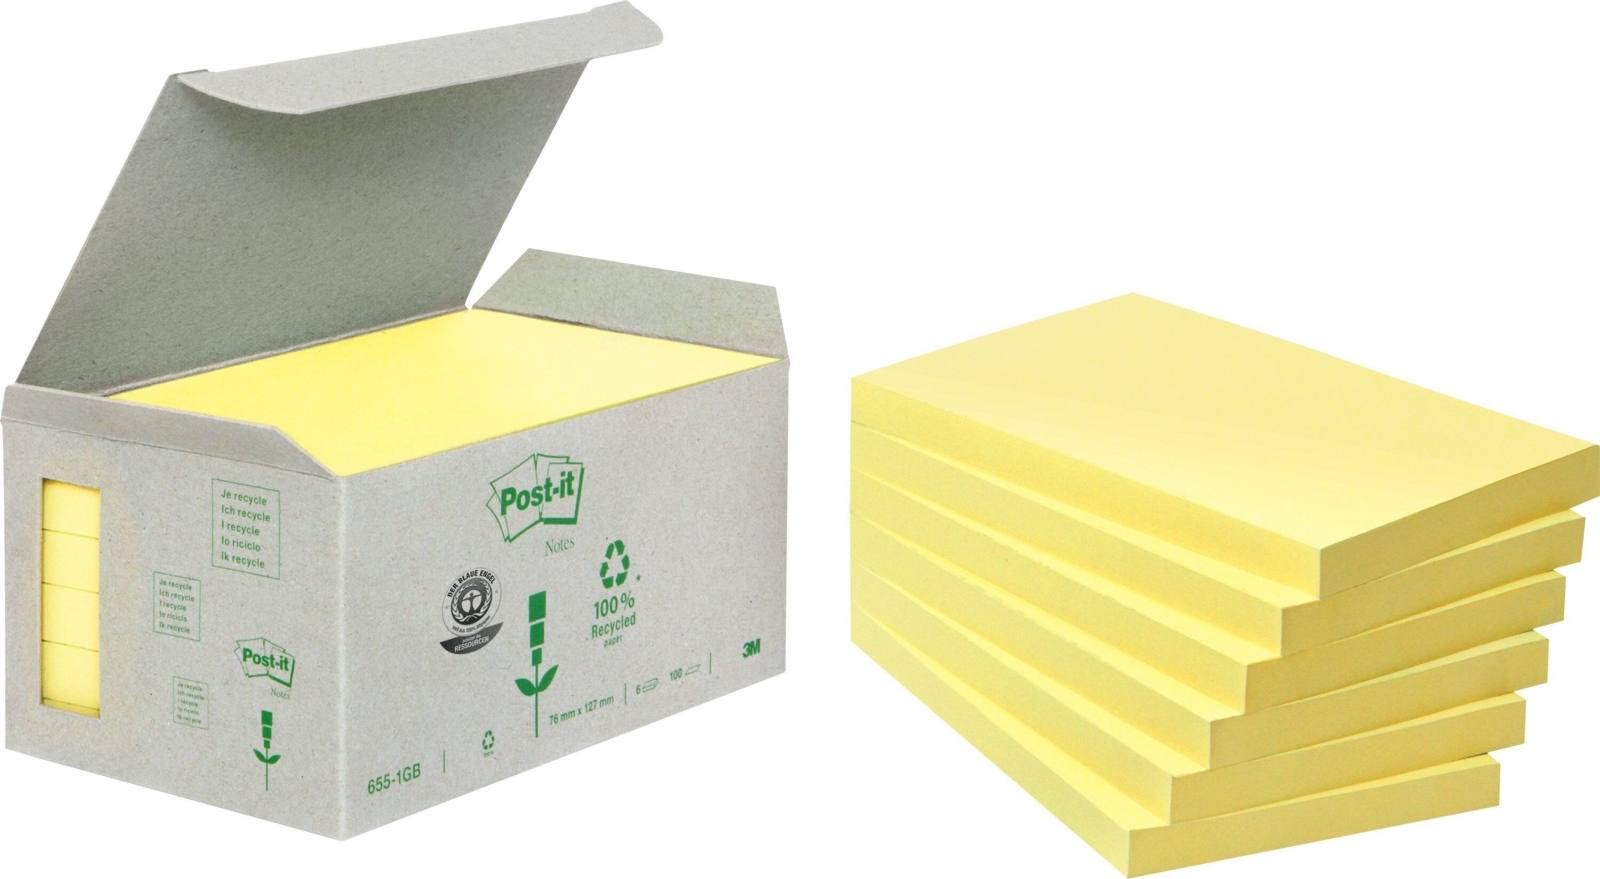 3M Post-it Recycling Notes 6551B, 127 mm x 76 mm, yellow, 6 pads of 100 sheets each